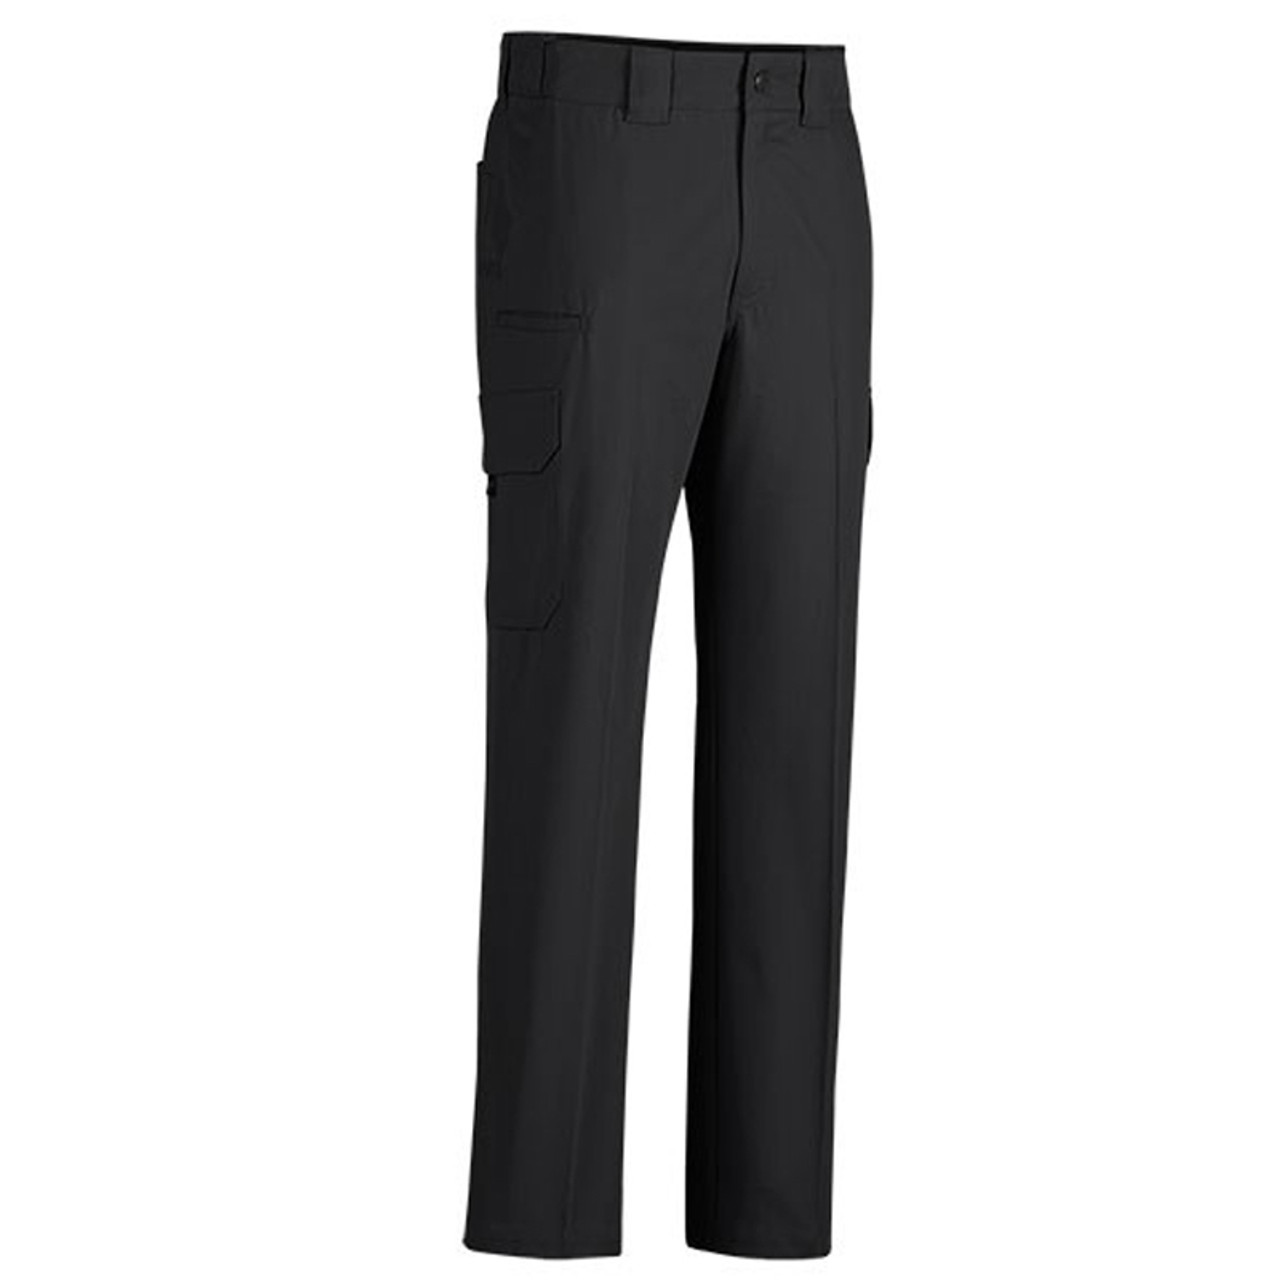 Dickies Men's Ripstop Stretch Tactical Pants Elasterell/Cotton